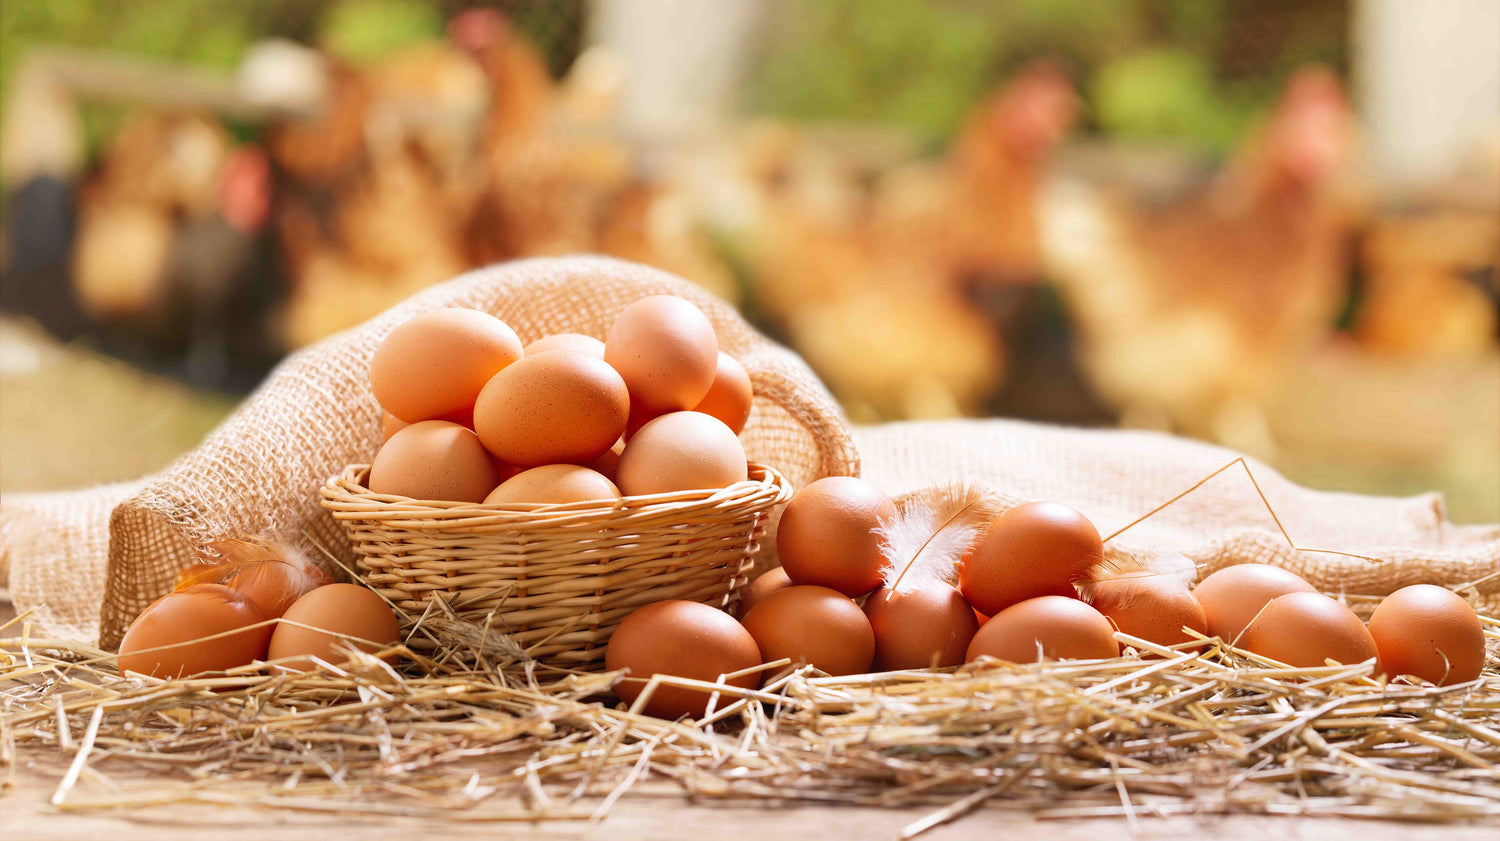 Reasons why eggs are good for you and why you should eat them more often.